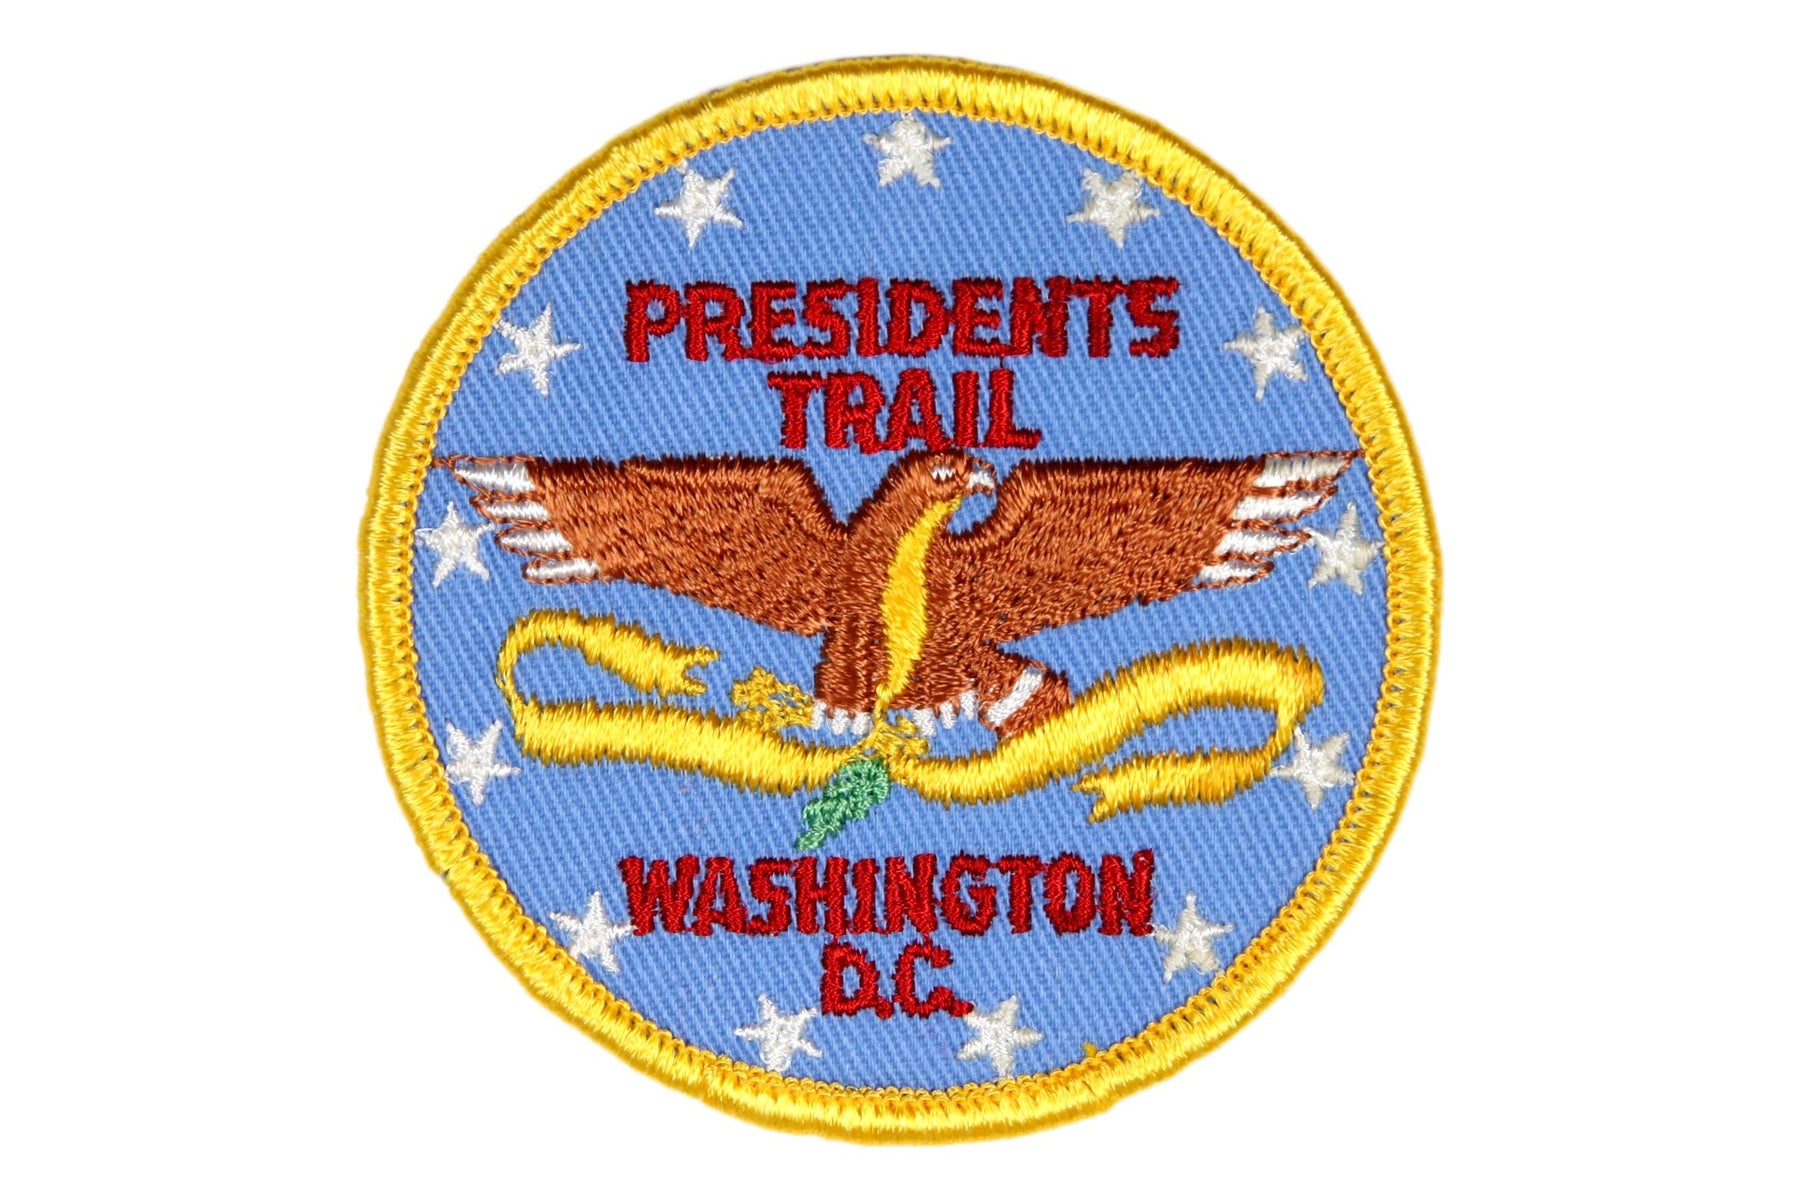 Presidents Trail Patch